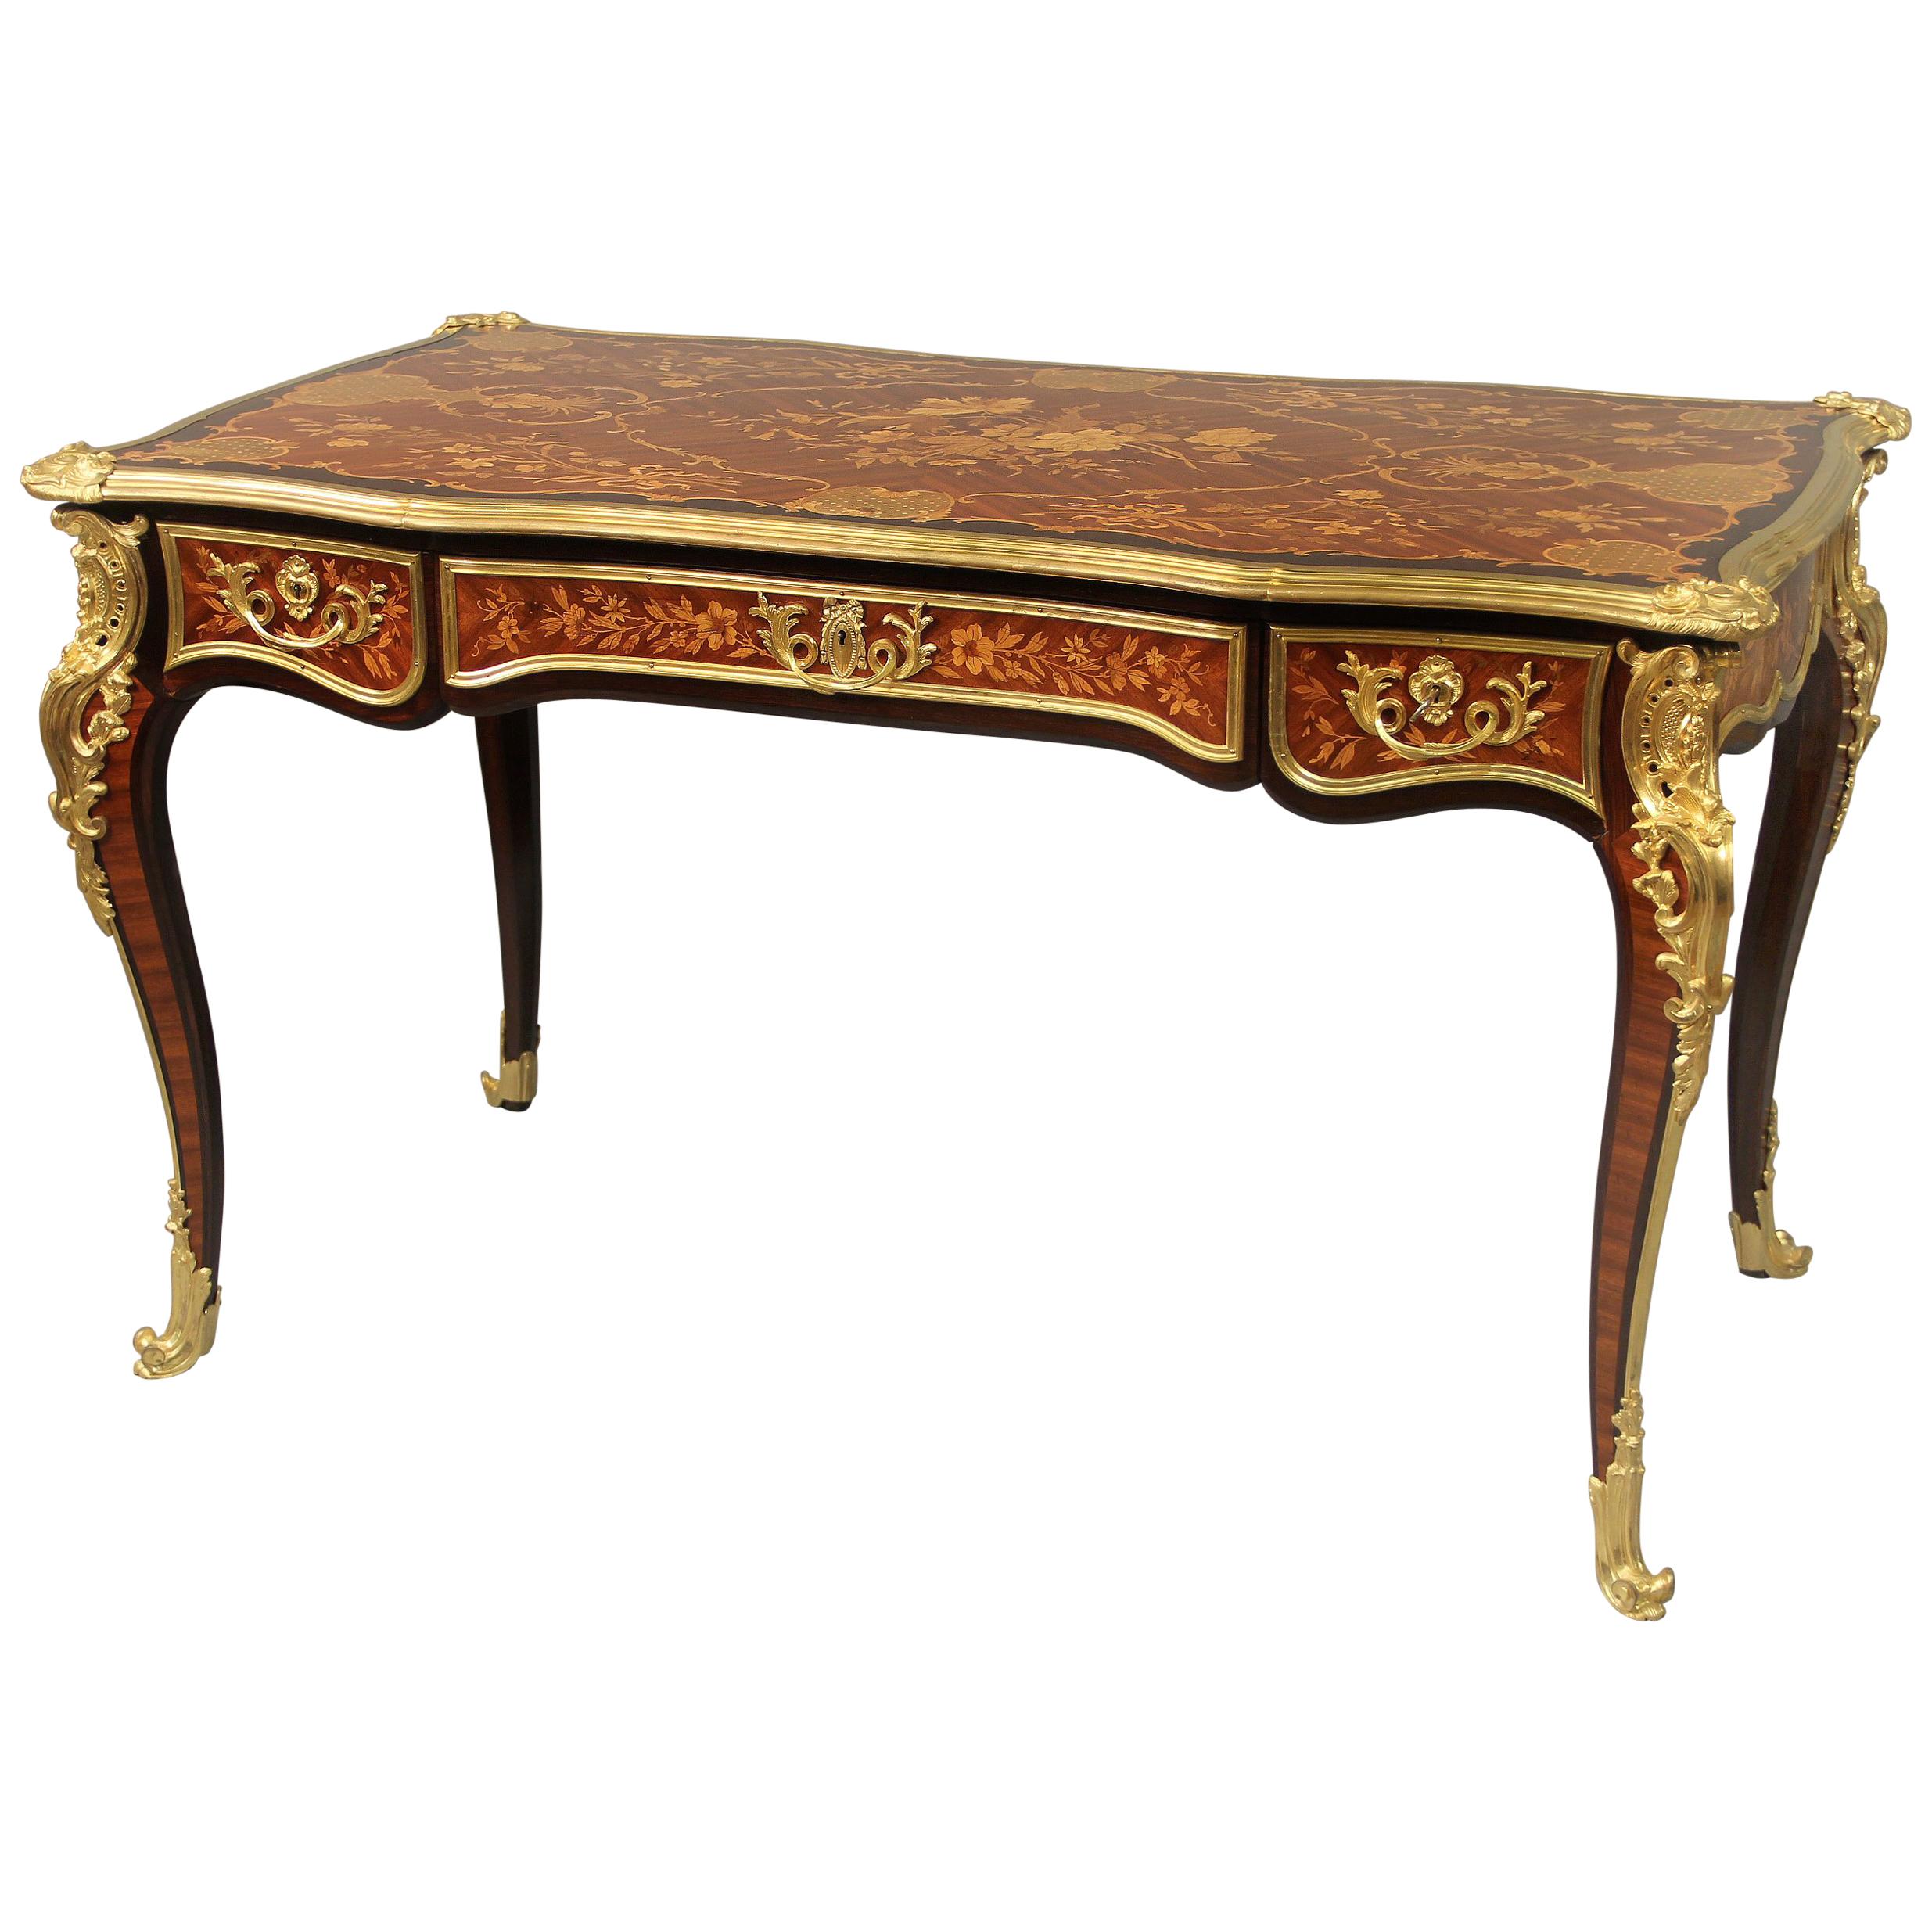 Late 19th Century Gilt Bronze Mounted Inlaid Marquety Table by Paul Sormani For Sale